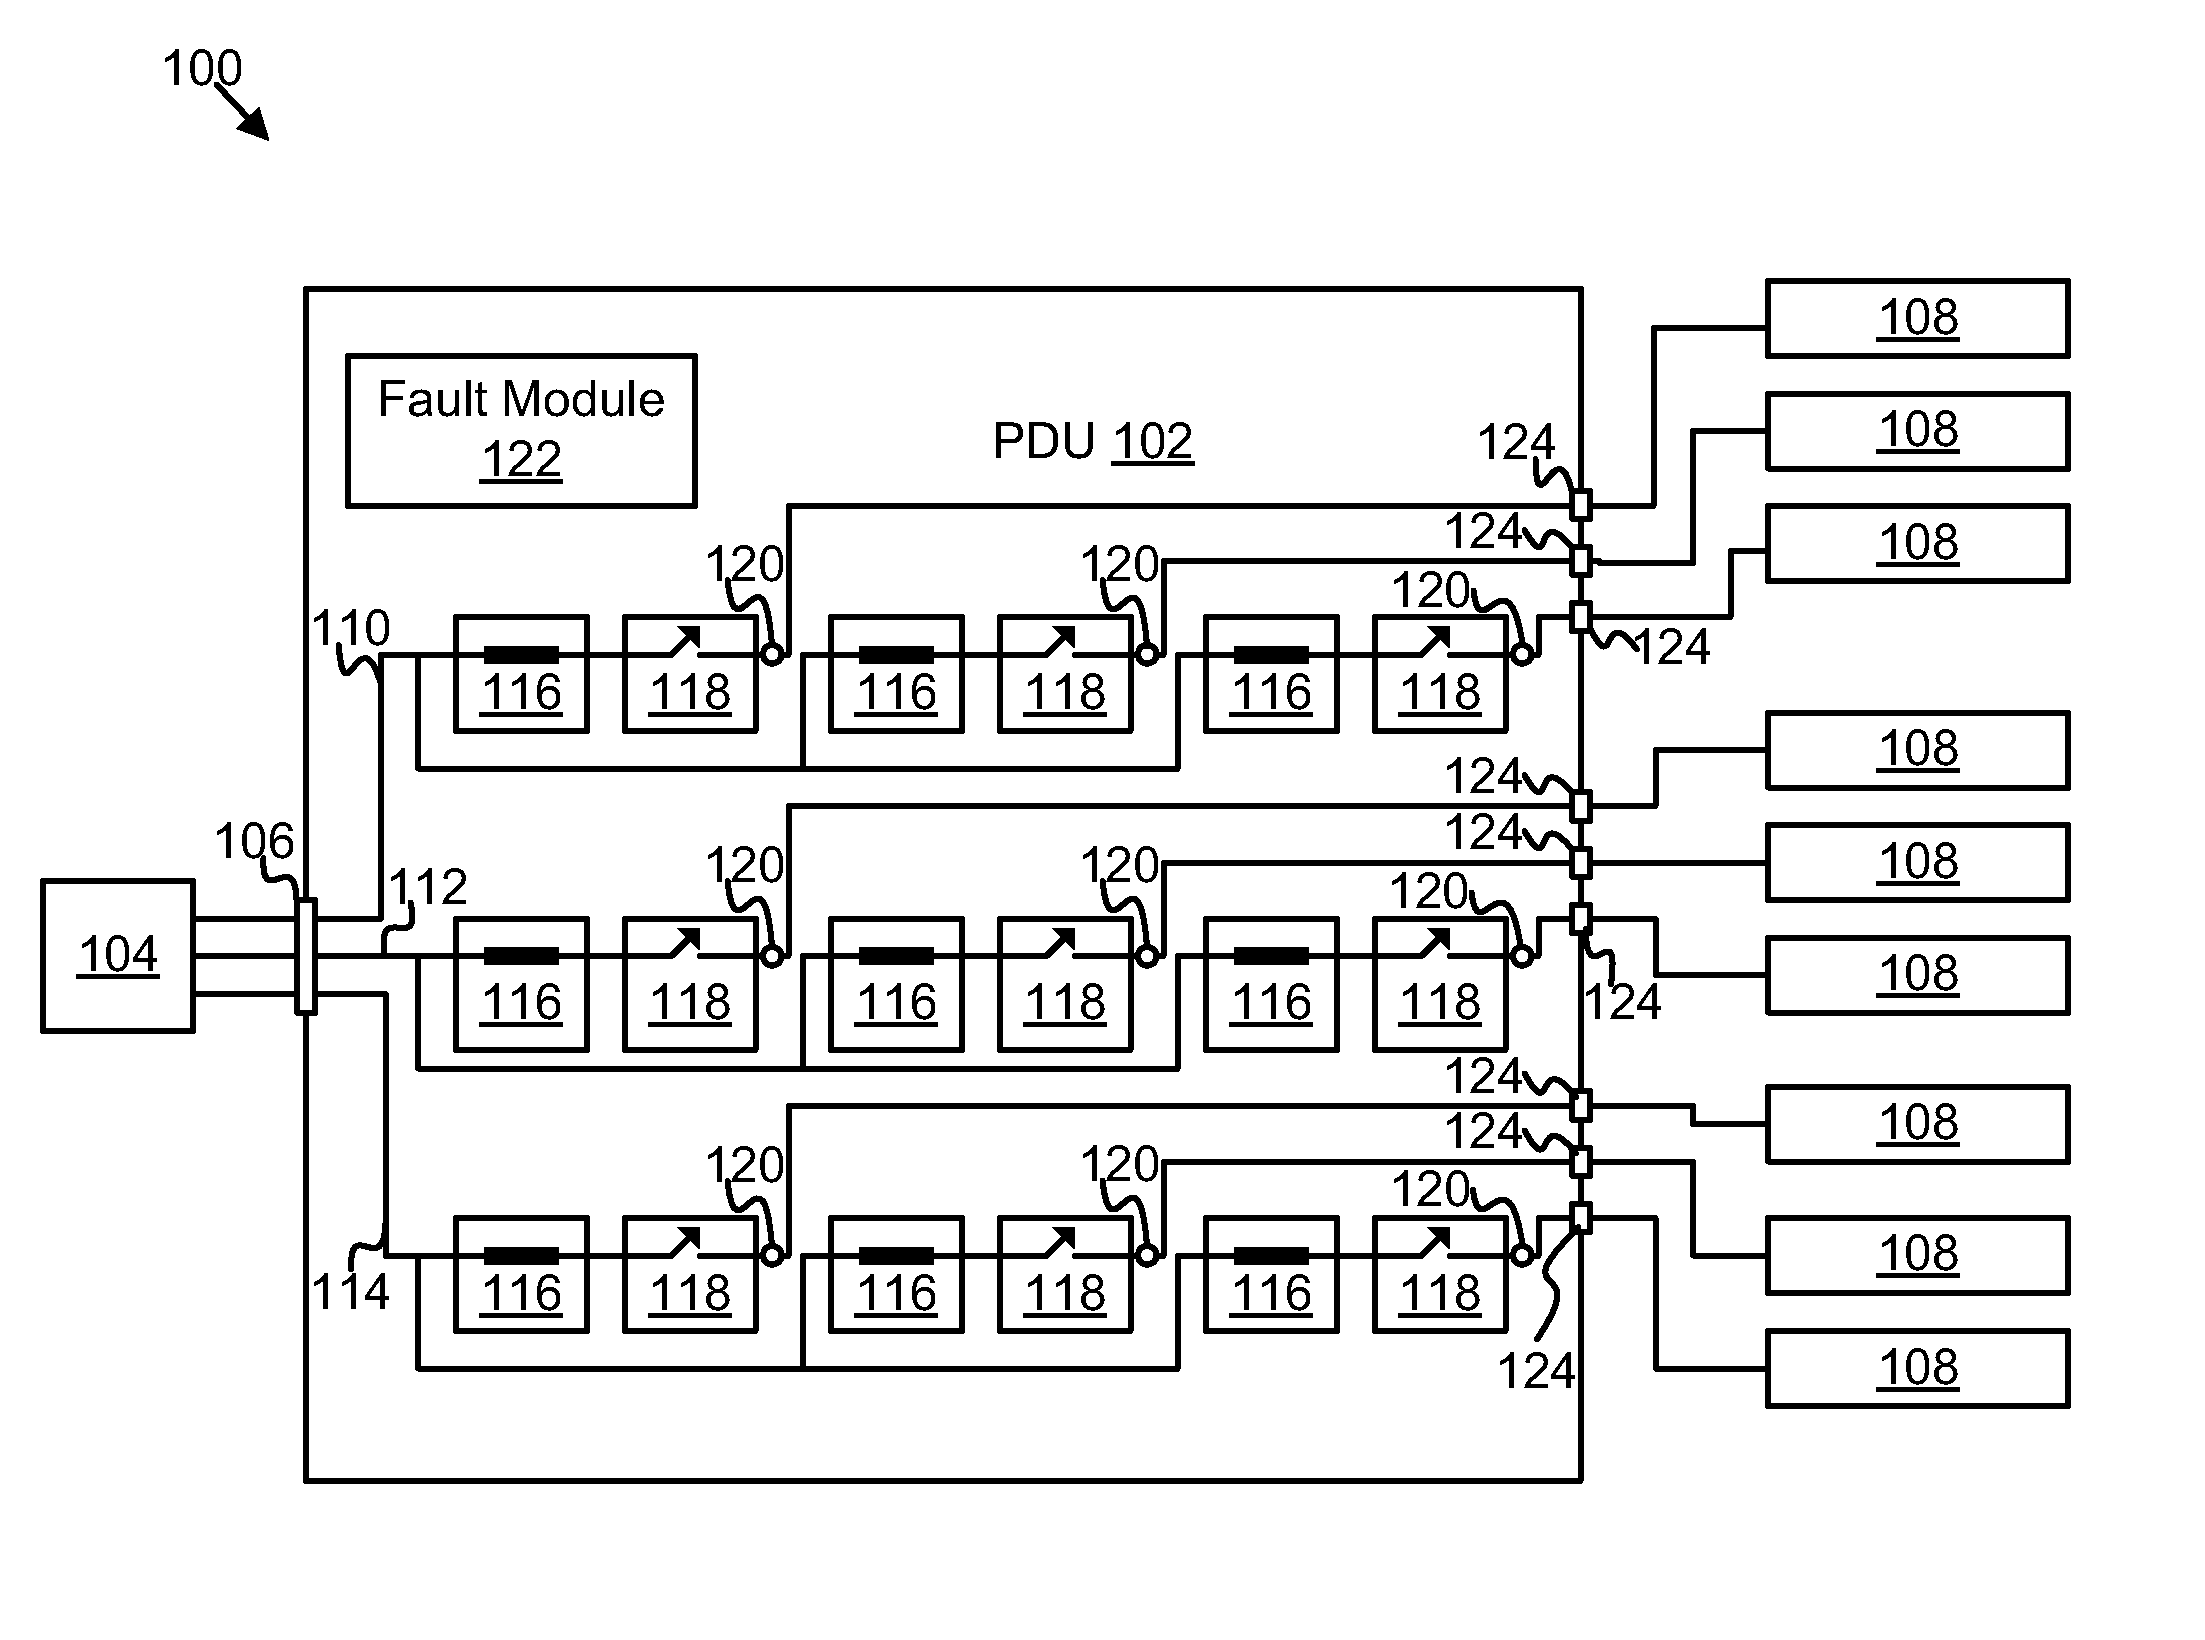 Power distribution unit branch protection